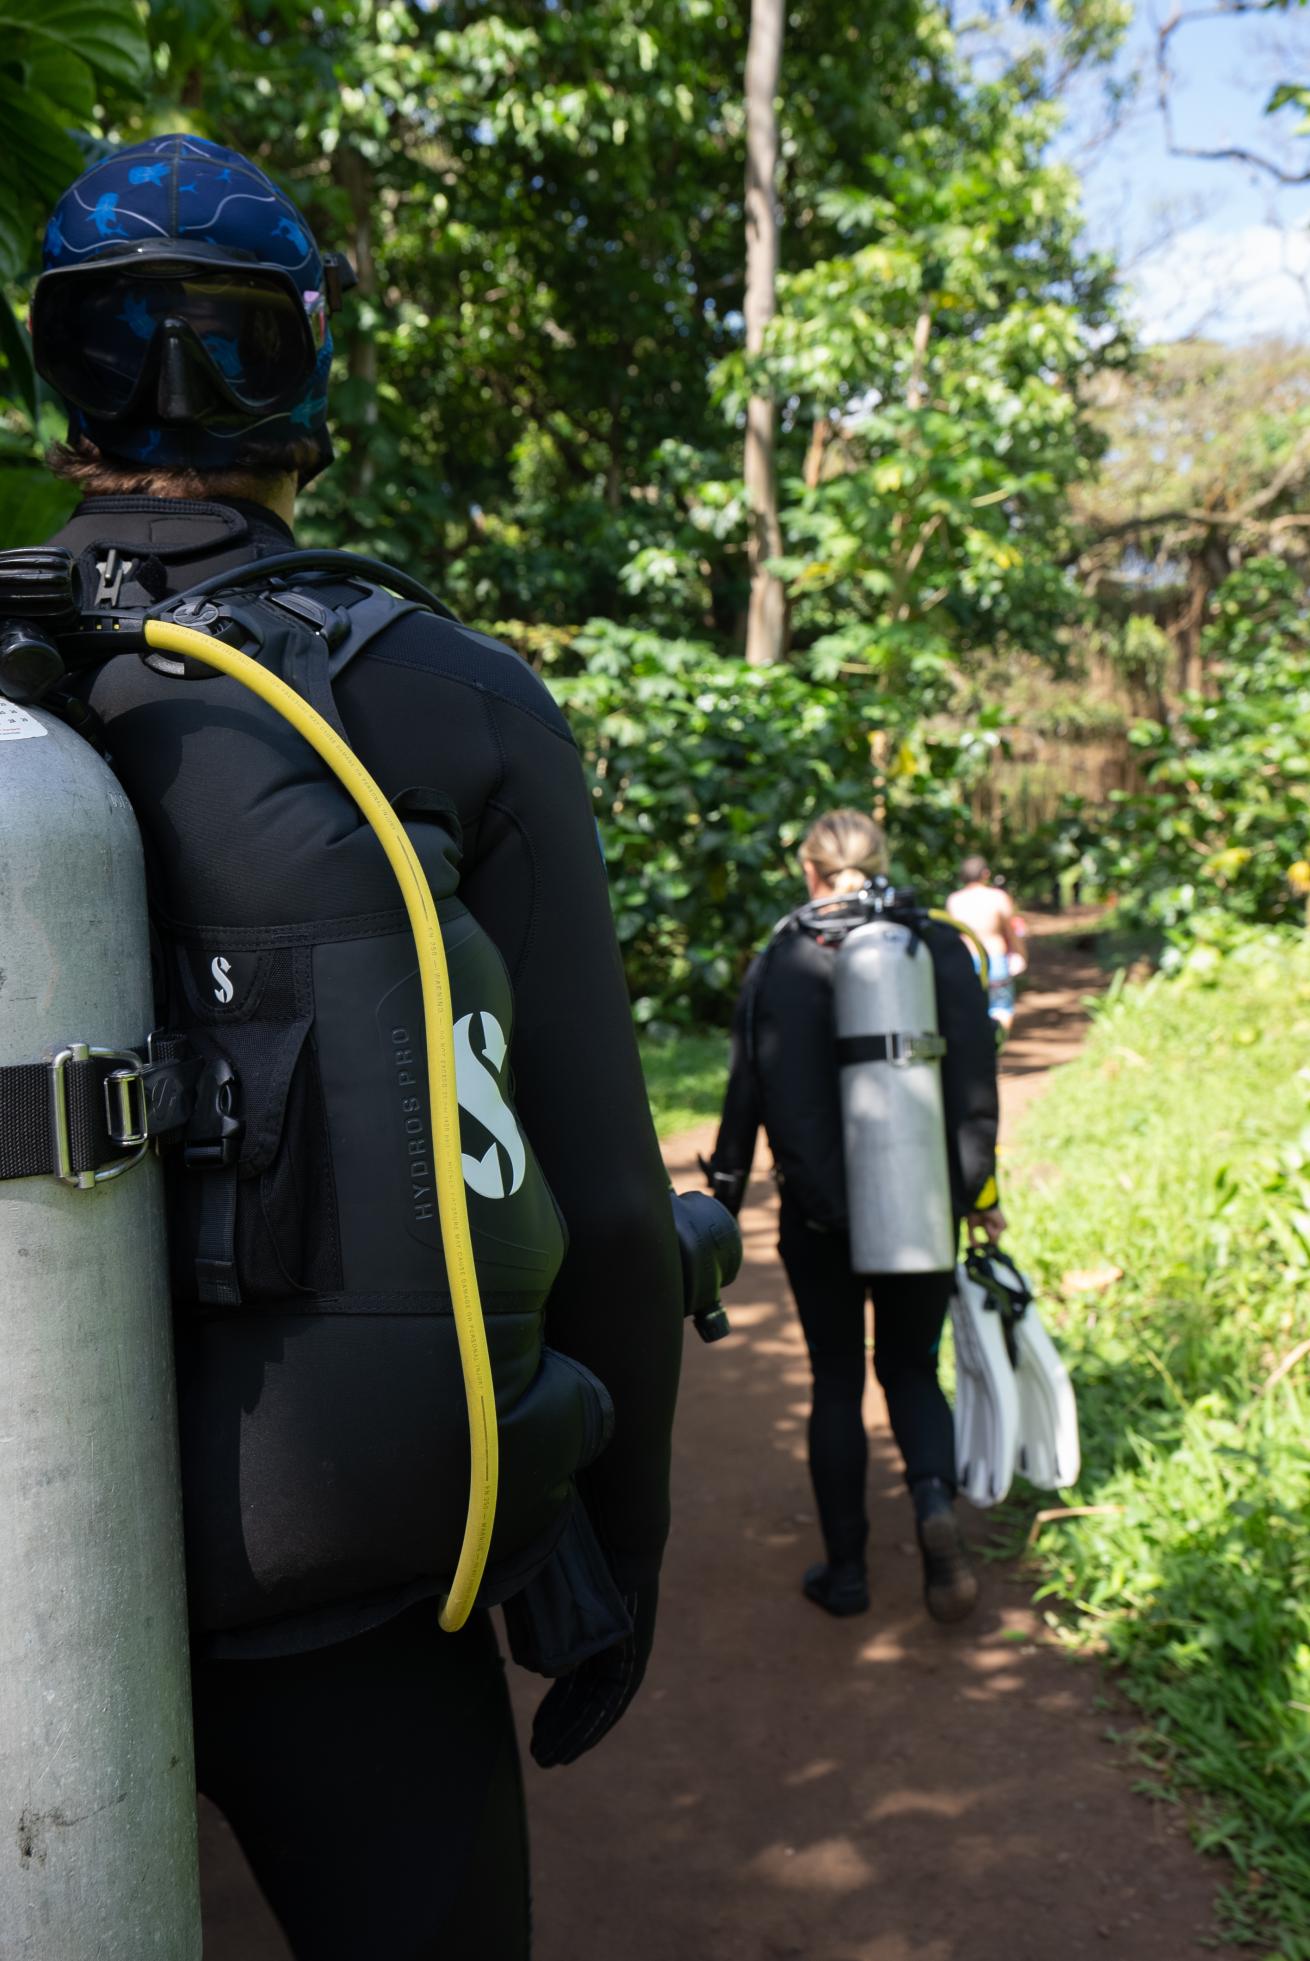 Scuba divers walk through a forest in Hawaii with scuba tanks on their backs to a dive site.